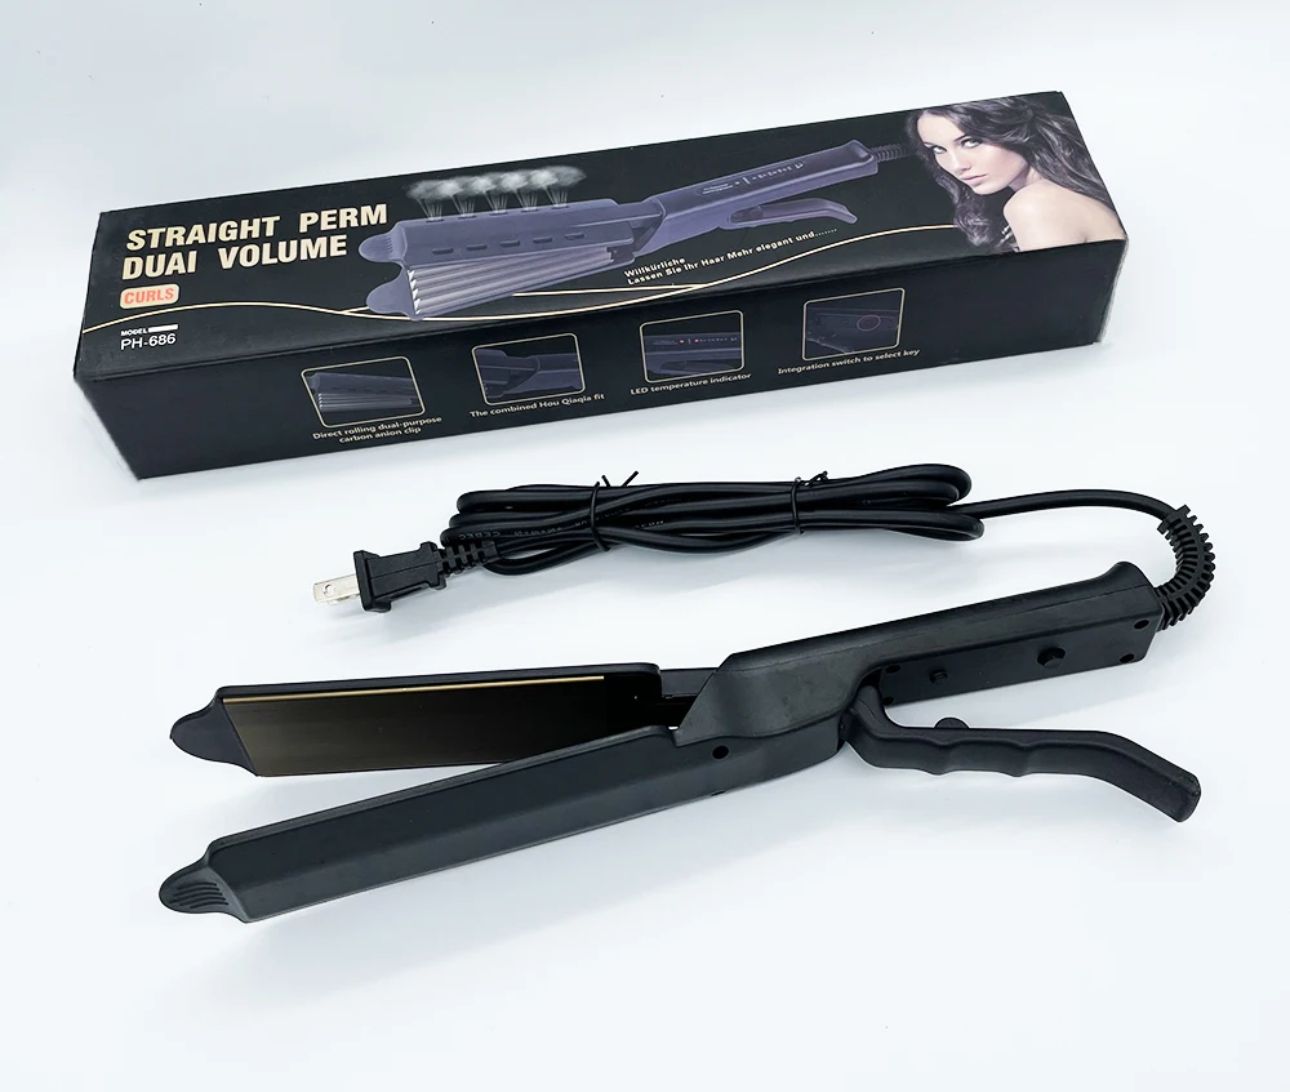 STRAIGHT PERM PH 686 3 Heat Mode Fast Heated Wide Flat Iron Professional Hair Straightening Styling Tools Electric Steam Hair Straightener - JVJ Prime